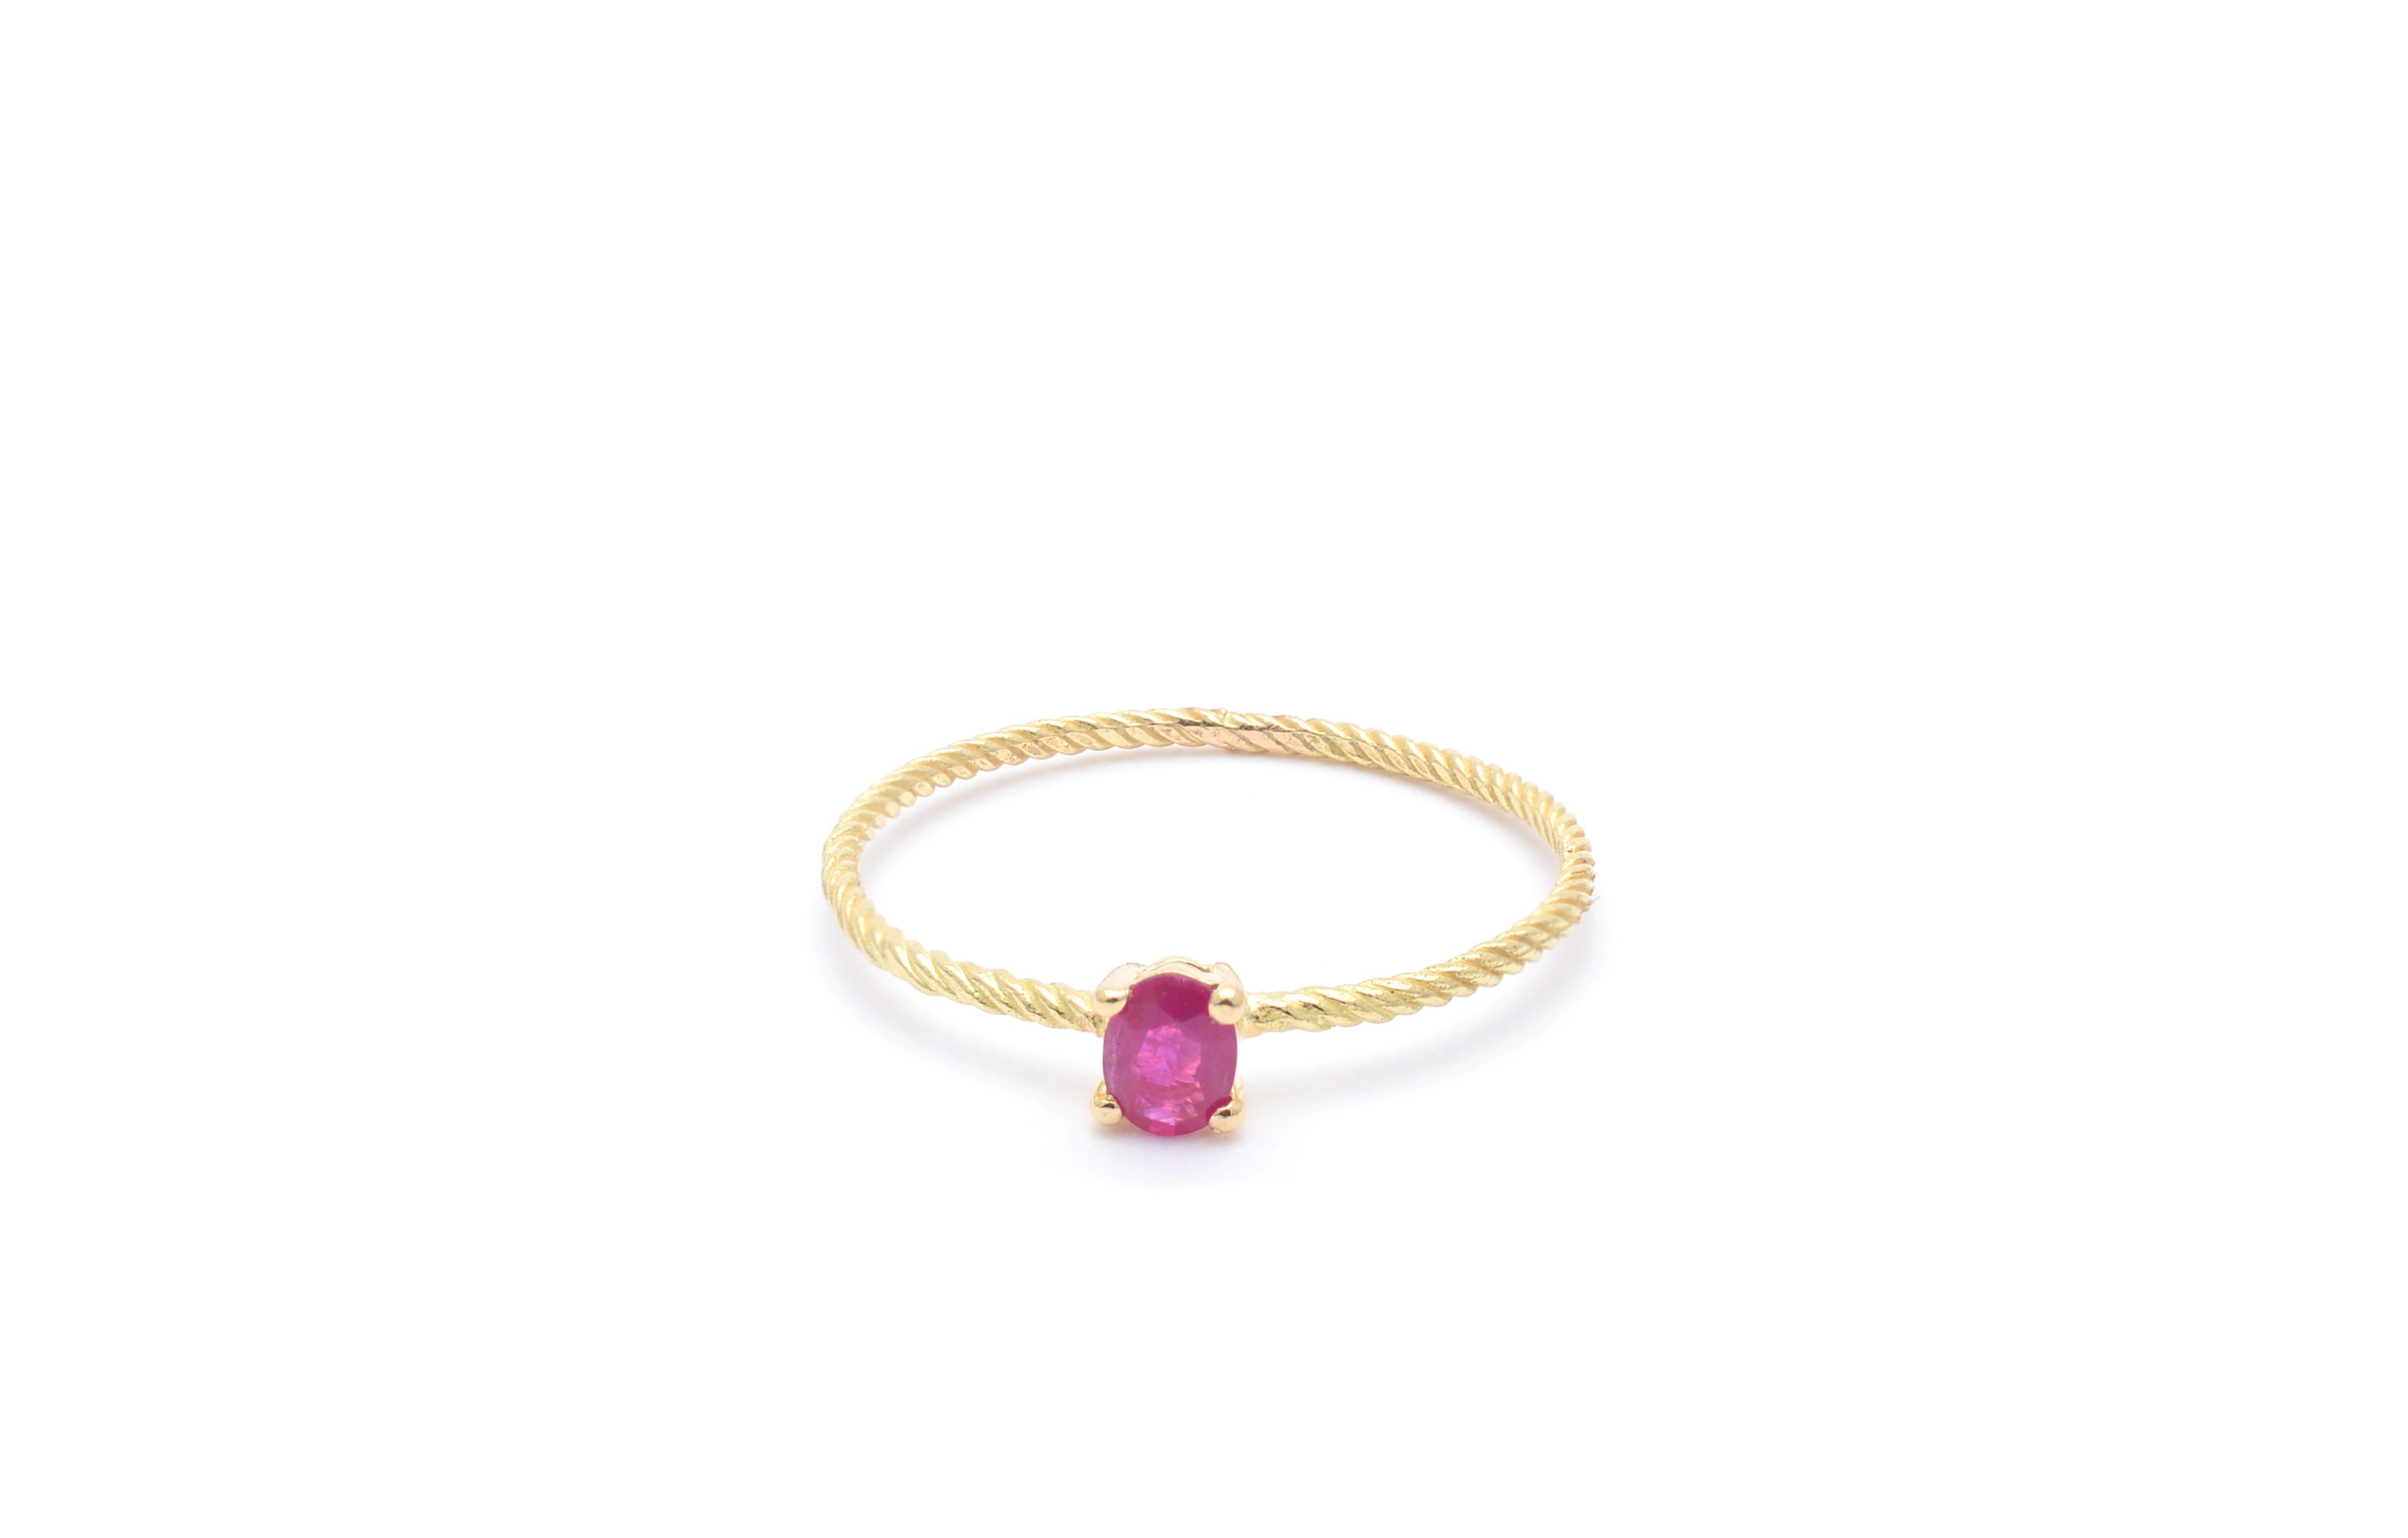 18kt Gold Twisted Ring With Ruby